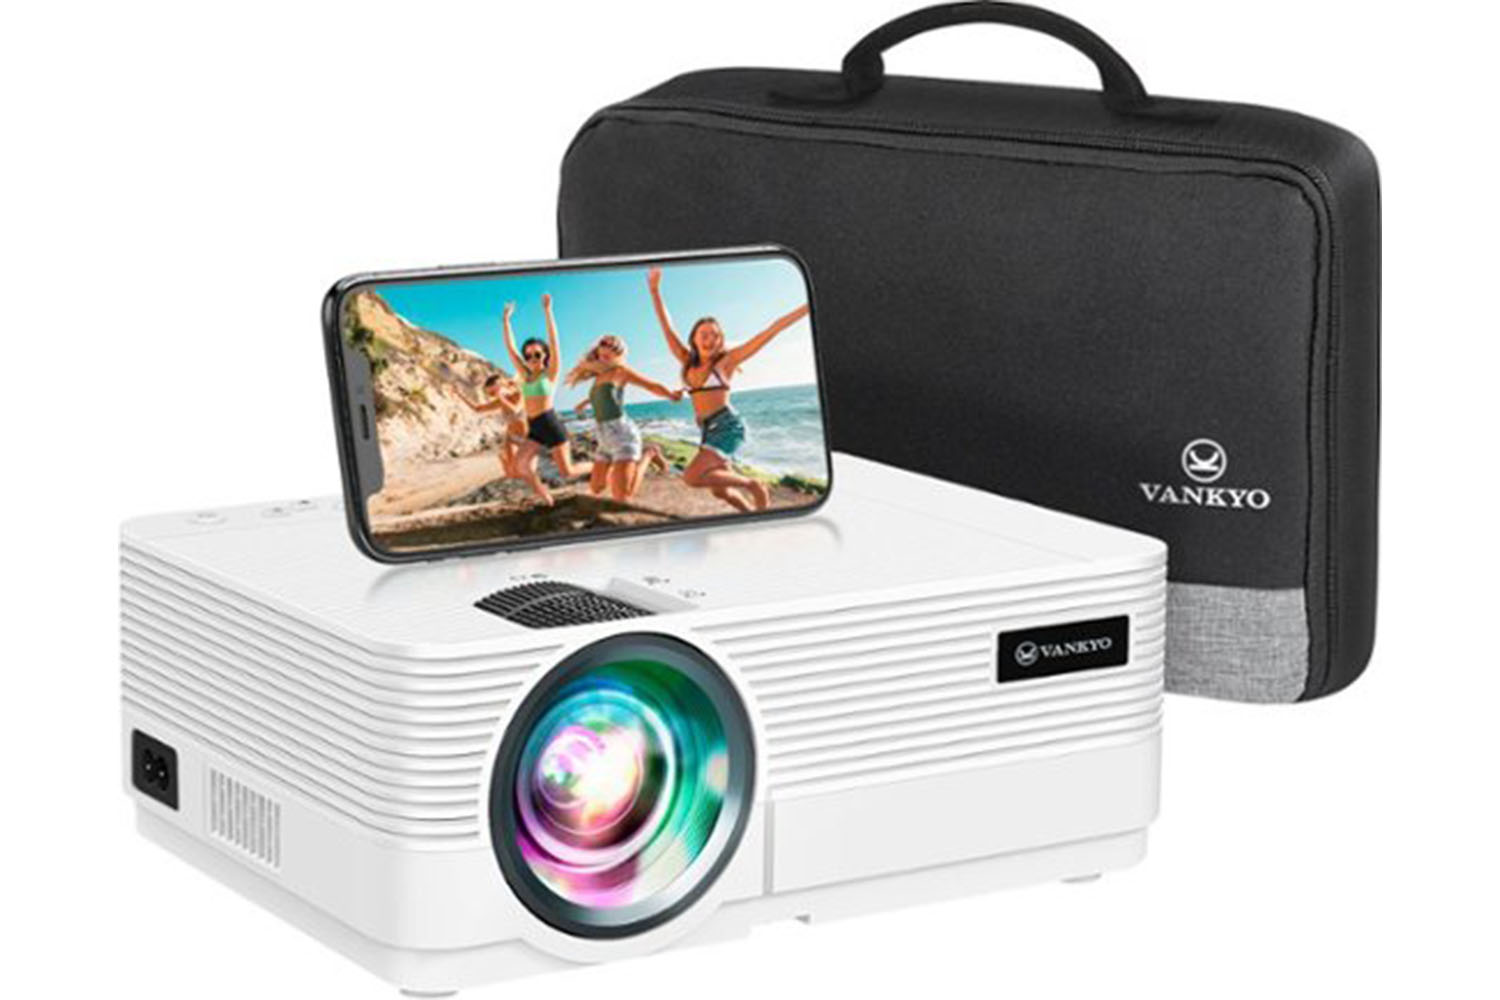 The Vankyo Leisure 470 Pro Native 1080p Mini Projector on a white background.